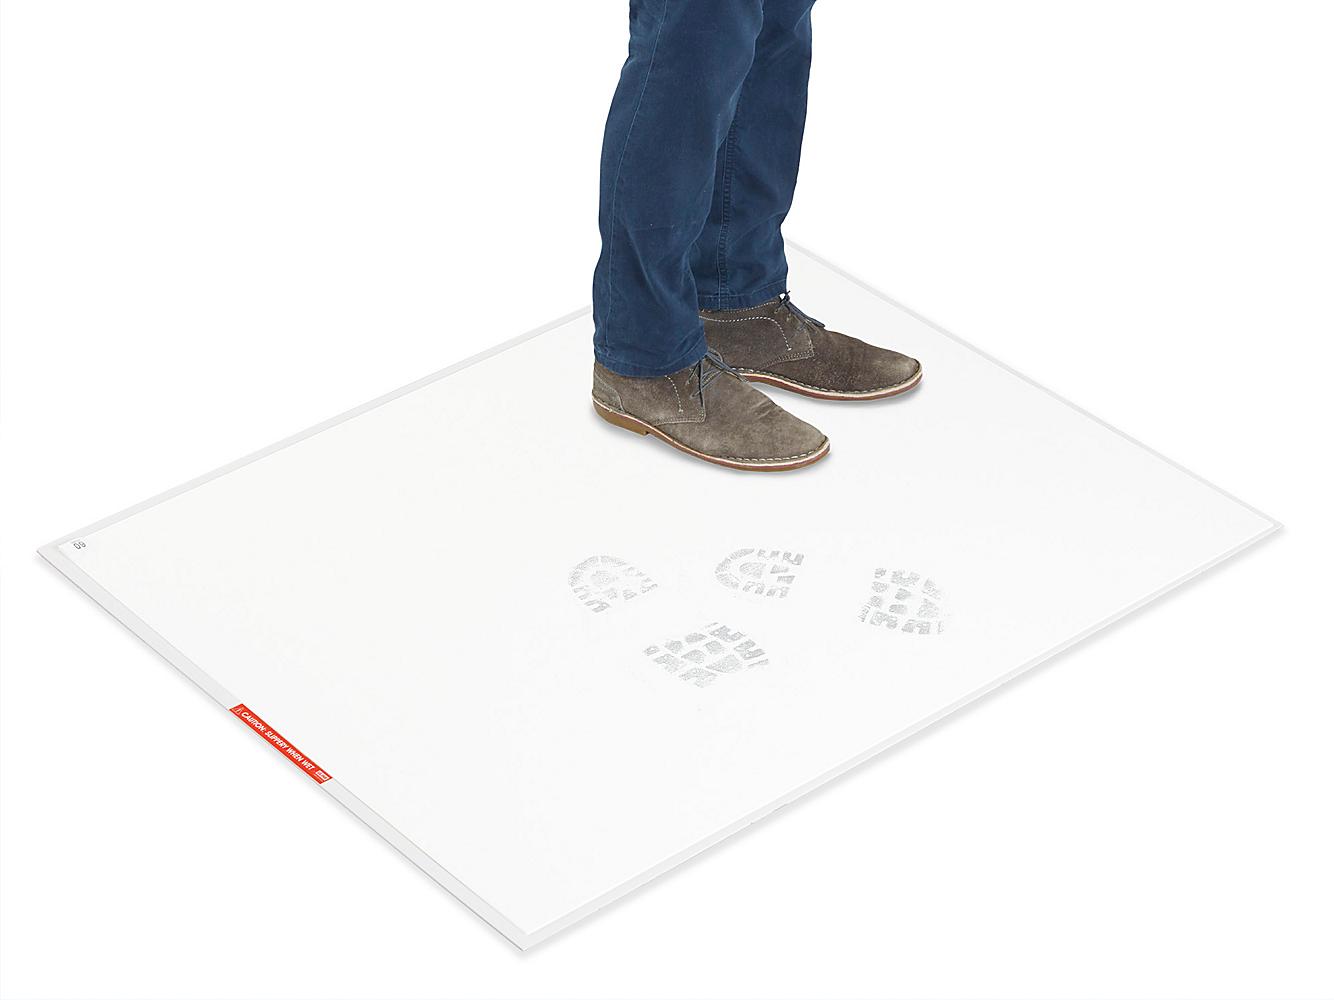 Cleanline Sticky Mat Frame, Aluminum | Solutions For Everything Clean